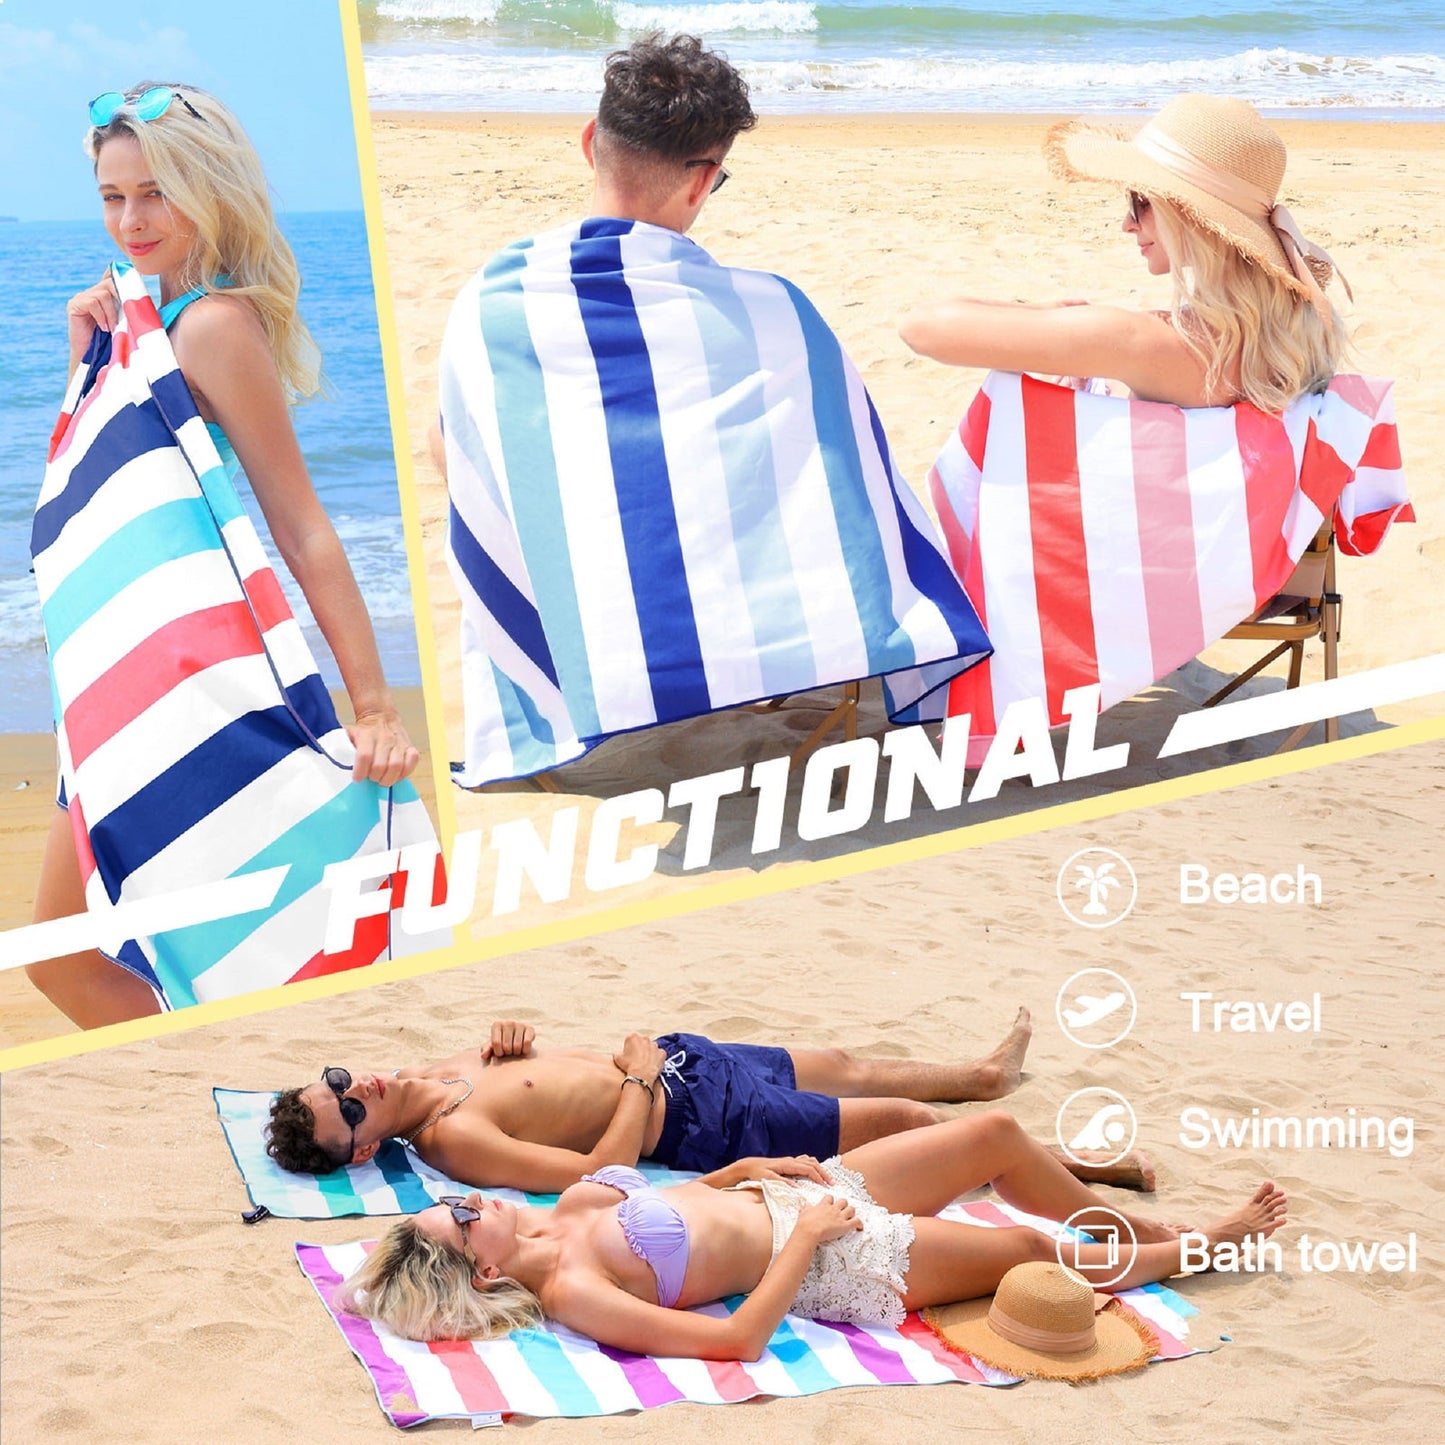 Exclusivo Mezcla Microfiber Quick Dry Beach Towel Set of 4, Oversized Sand Free Beach Towel for Travel/Camping/Sports (4 Pack , 35"X70") - Super Absorbent, Compact and Lightweight…